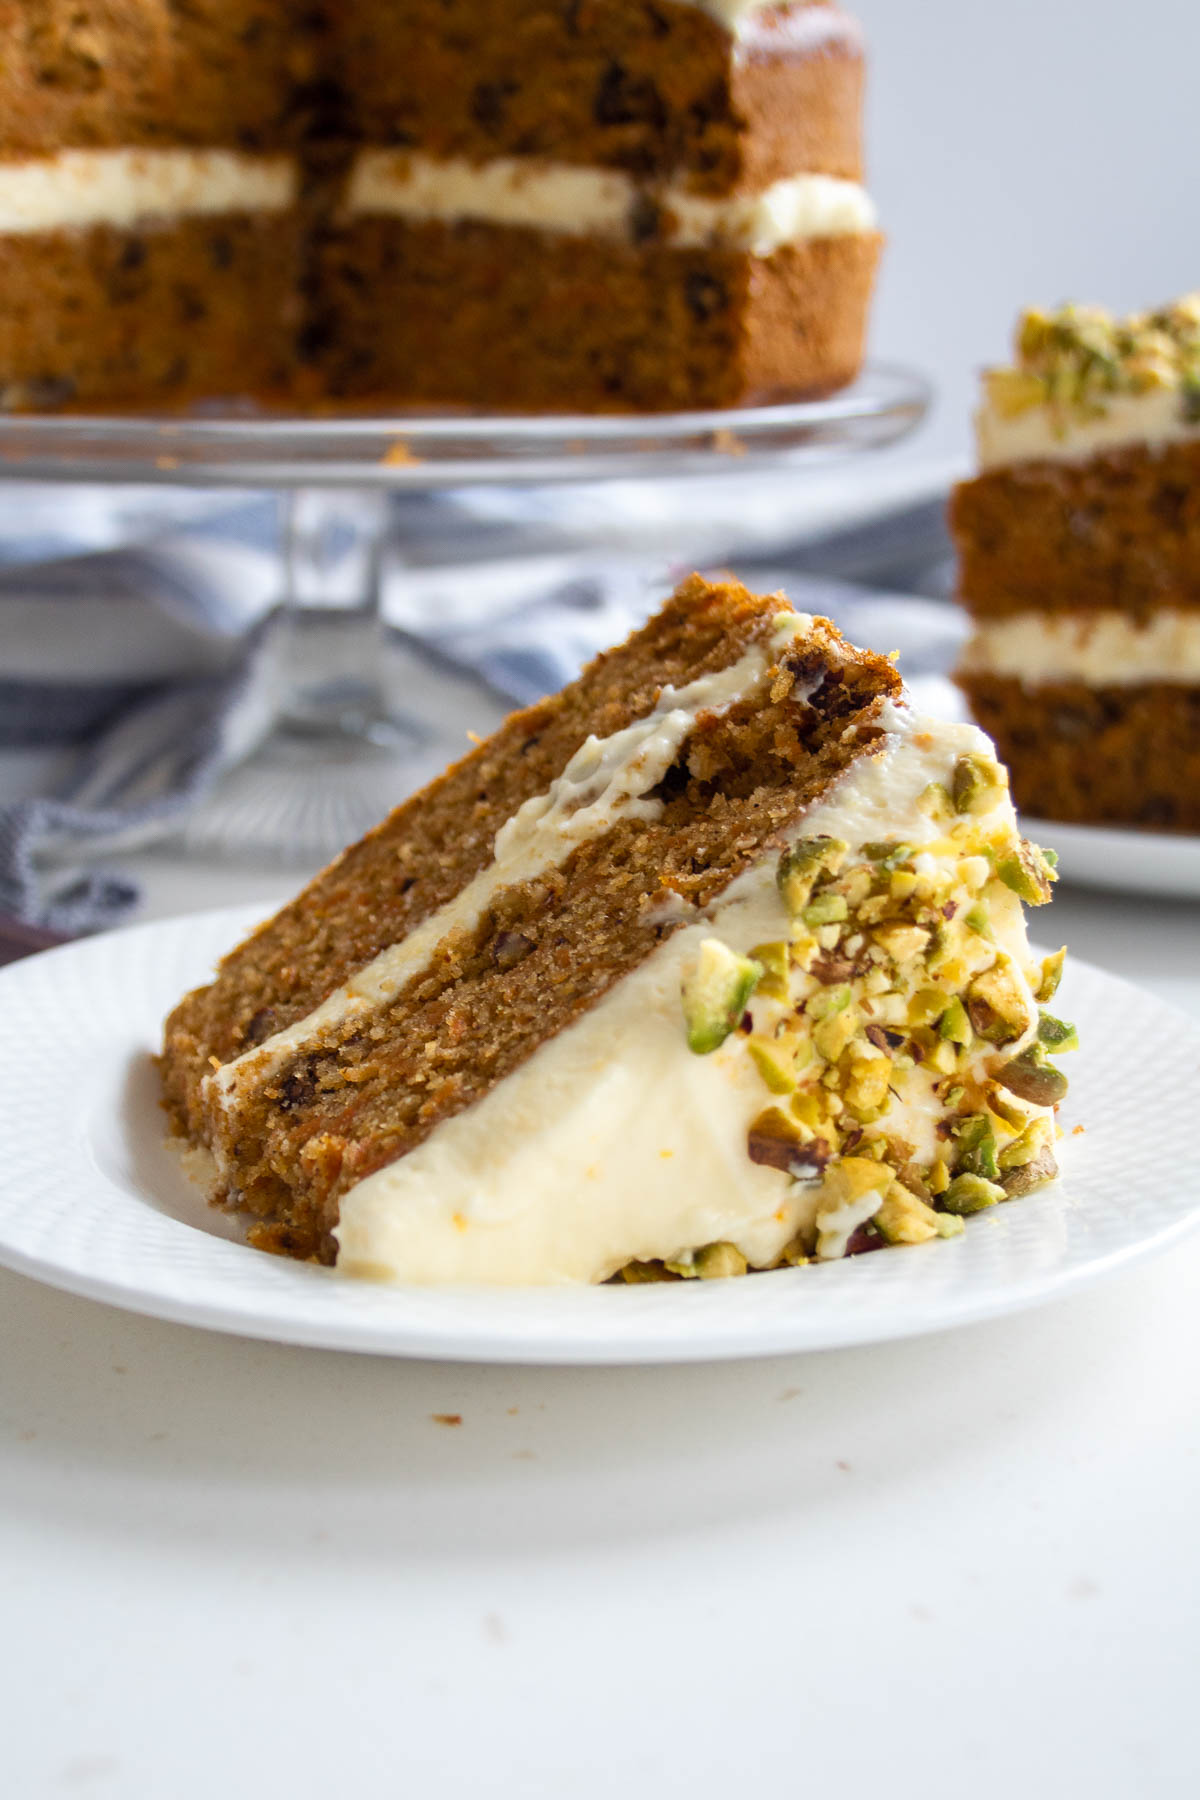 a slice of sugar free carrot cake lying on its side on a plate.